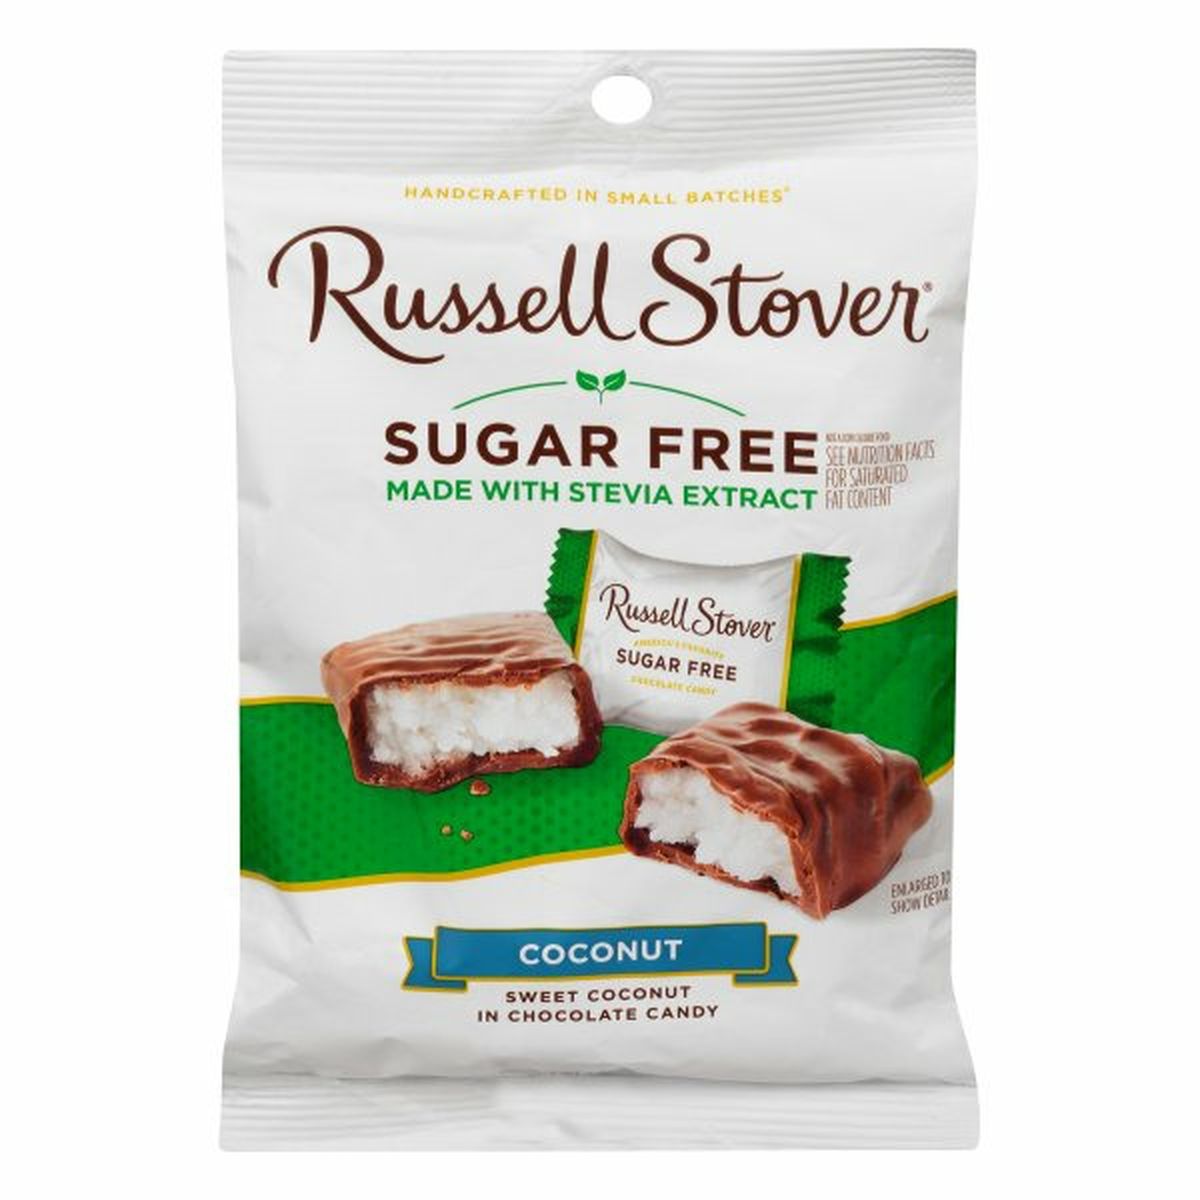 Calories in Russell Stover Chocolate Candy, Sugar Free, Coconut